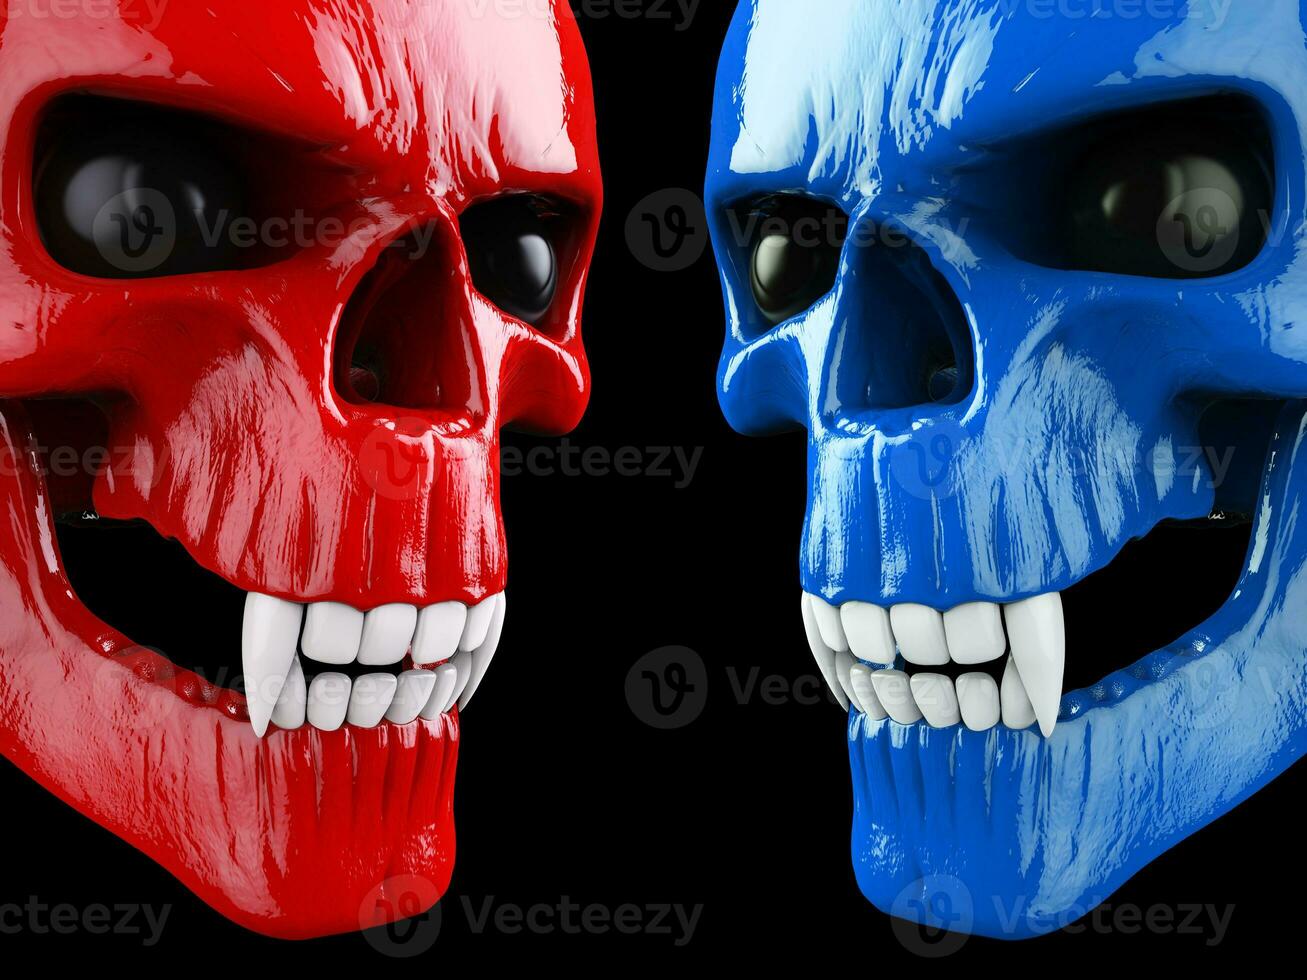 Red and blue vampire skulls - face to face photo